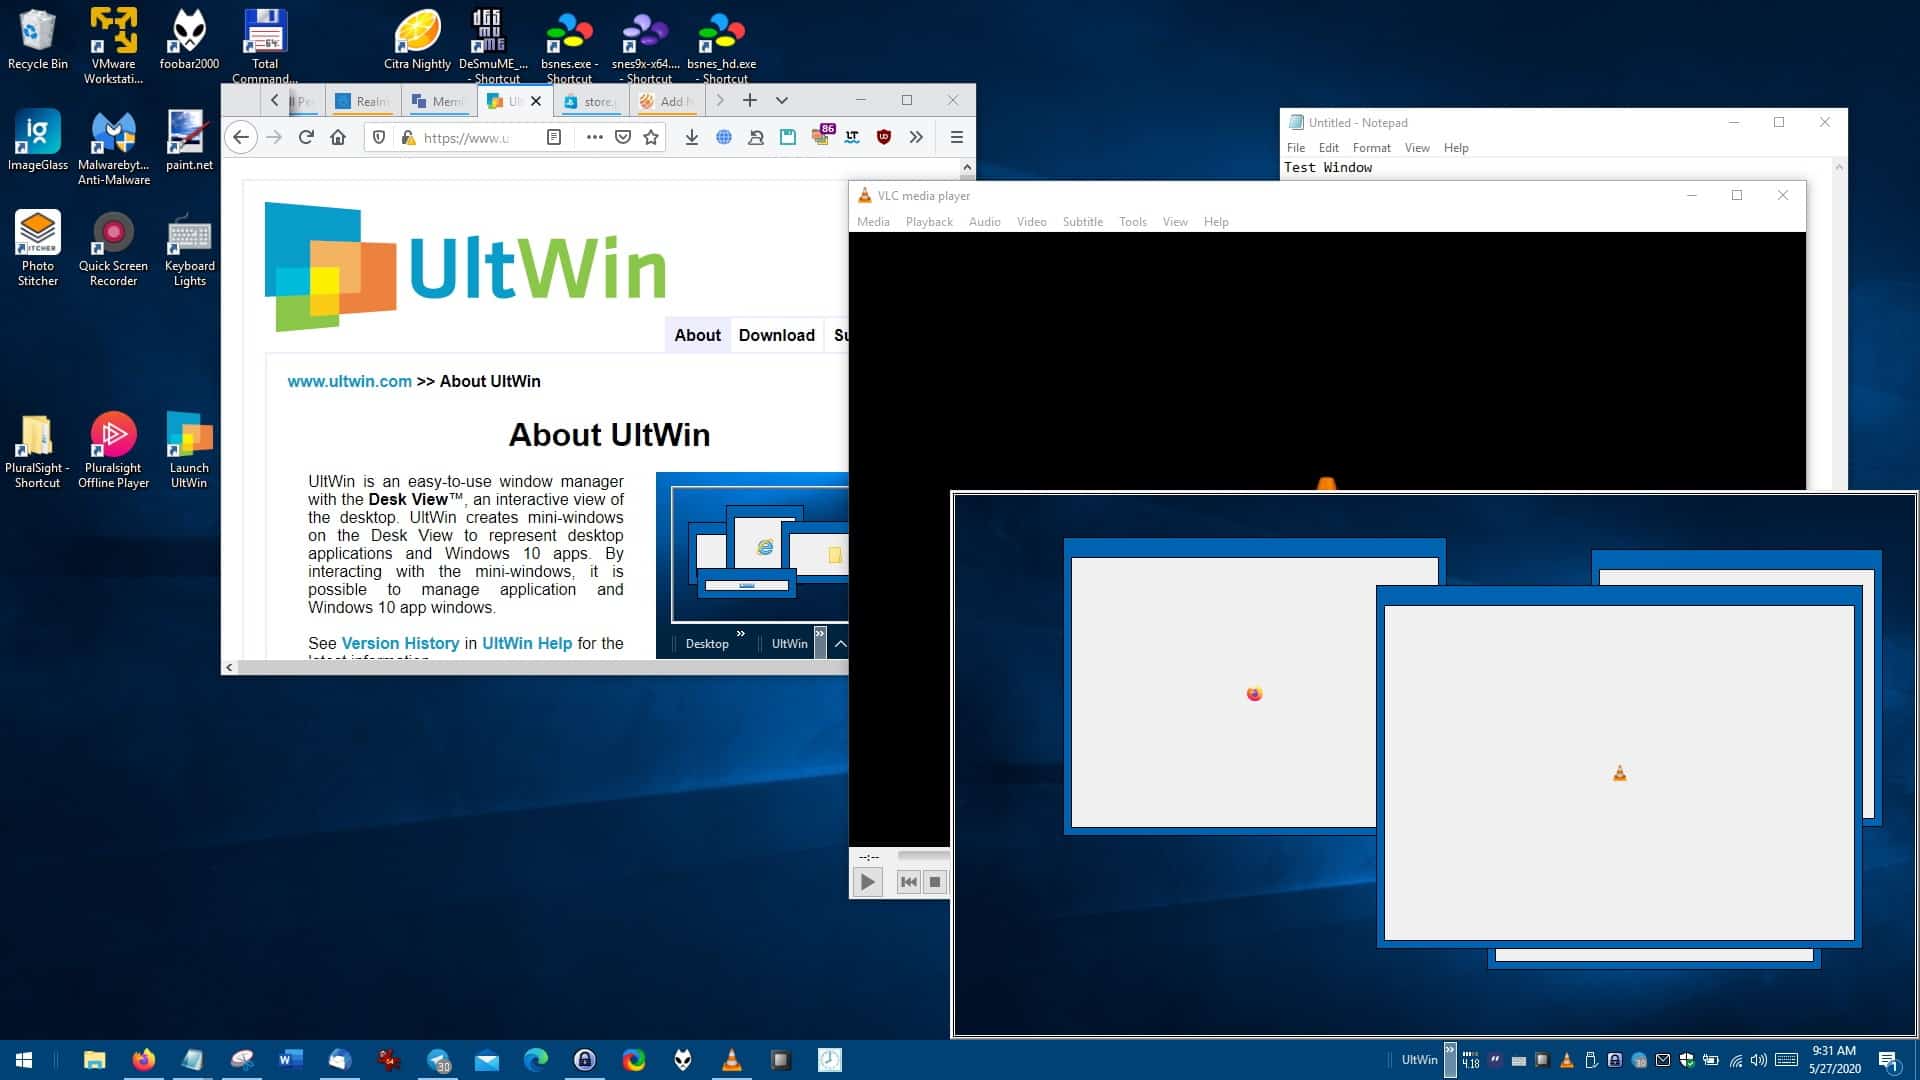 UltWin is a freeware window manager that can help you organize your desktop